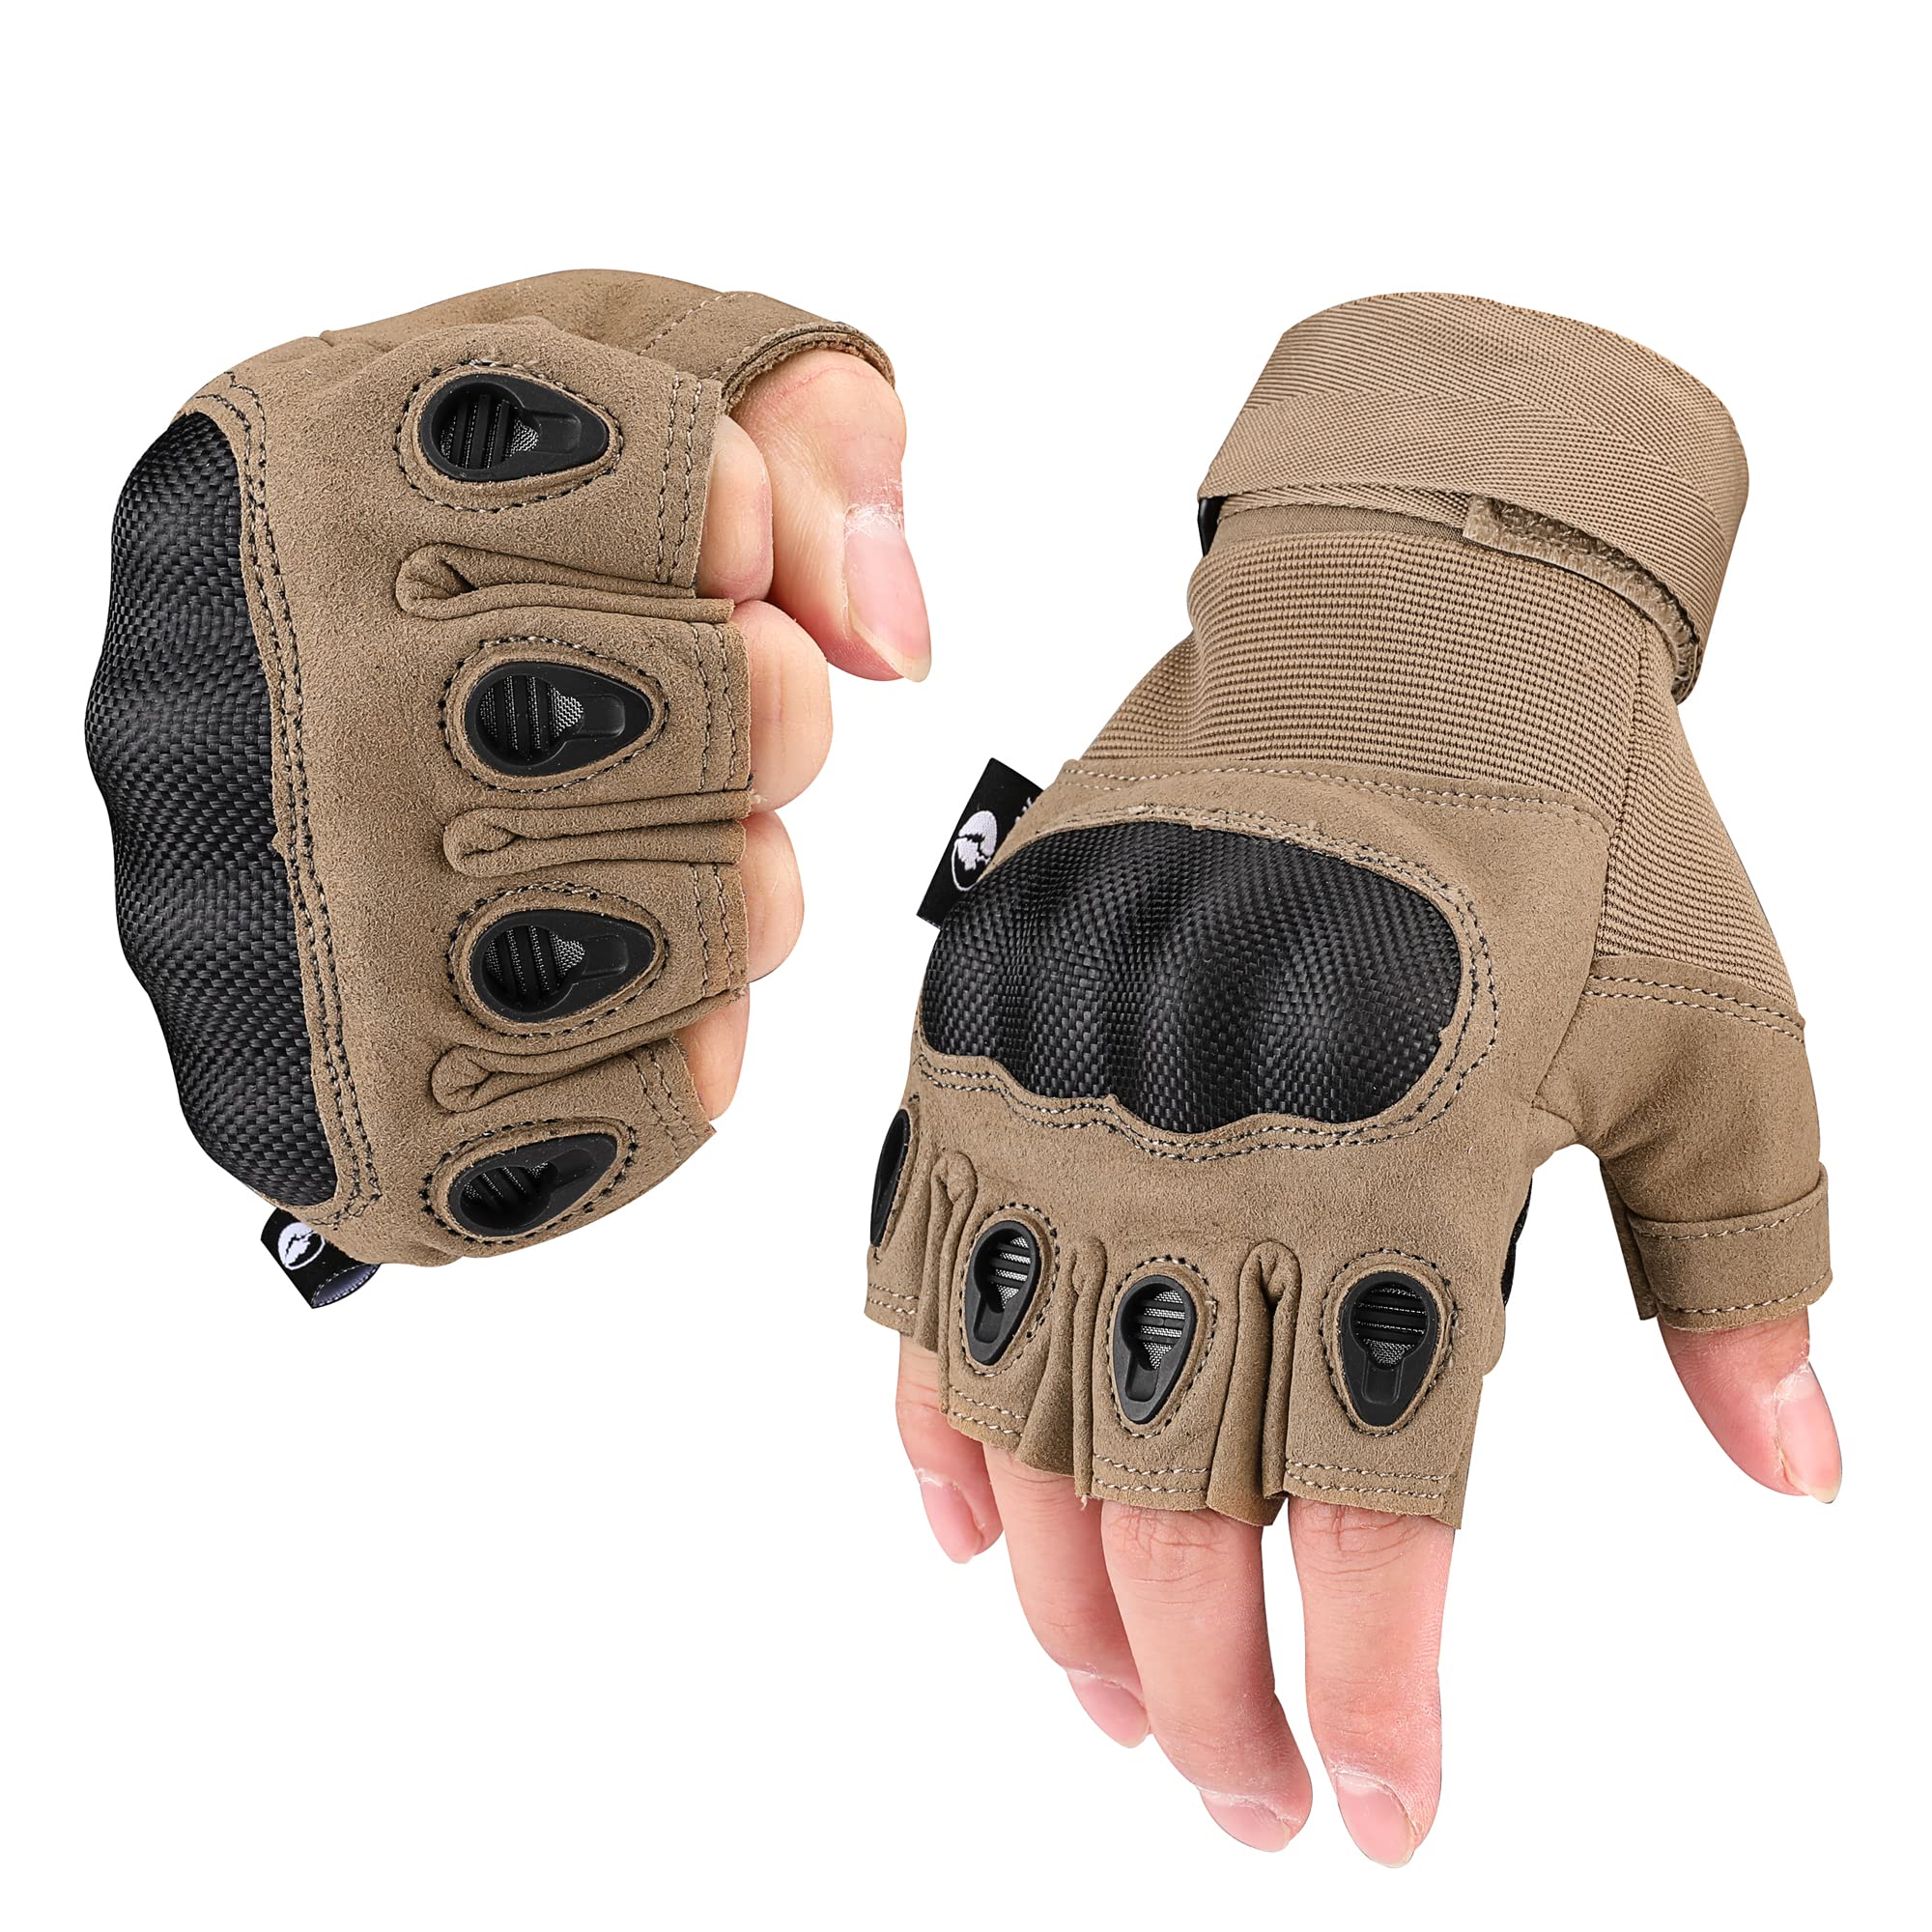 Mossy Oak Tactical Gloves, Touchscreen Airsoft Gloves with Hard Knuckle for  Hunting, Paintball, Hiking, Camping, Climbing, Cycling, Motorcycle